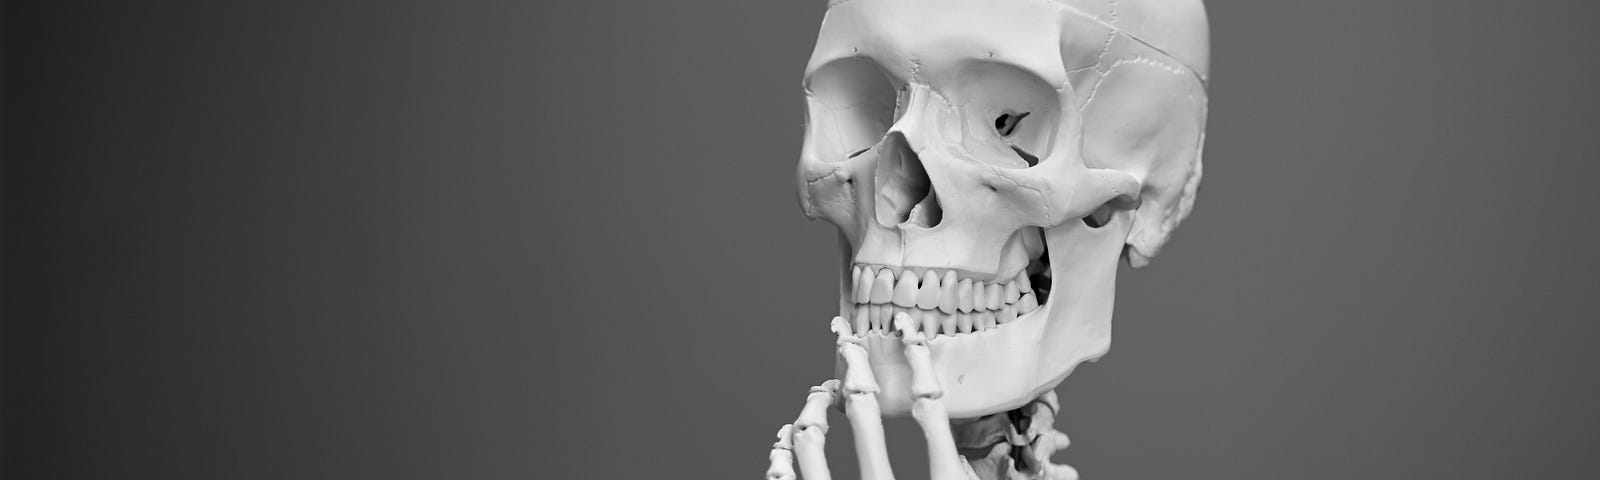 skeleton in a thoughtful pose